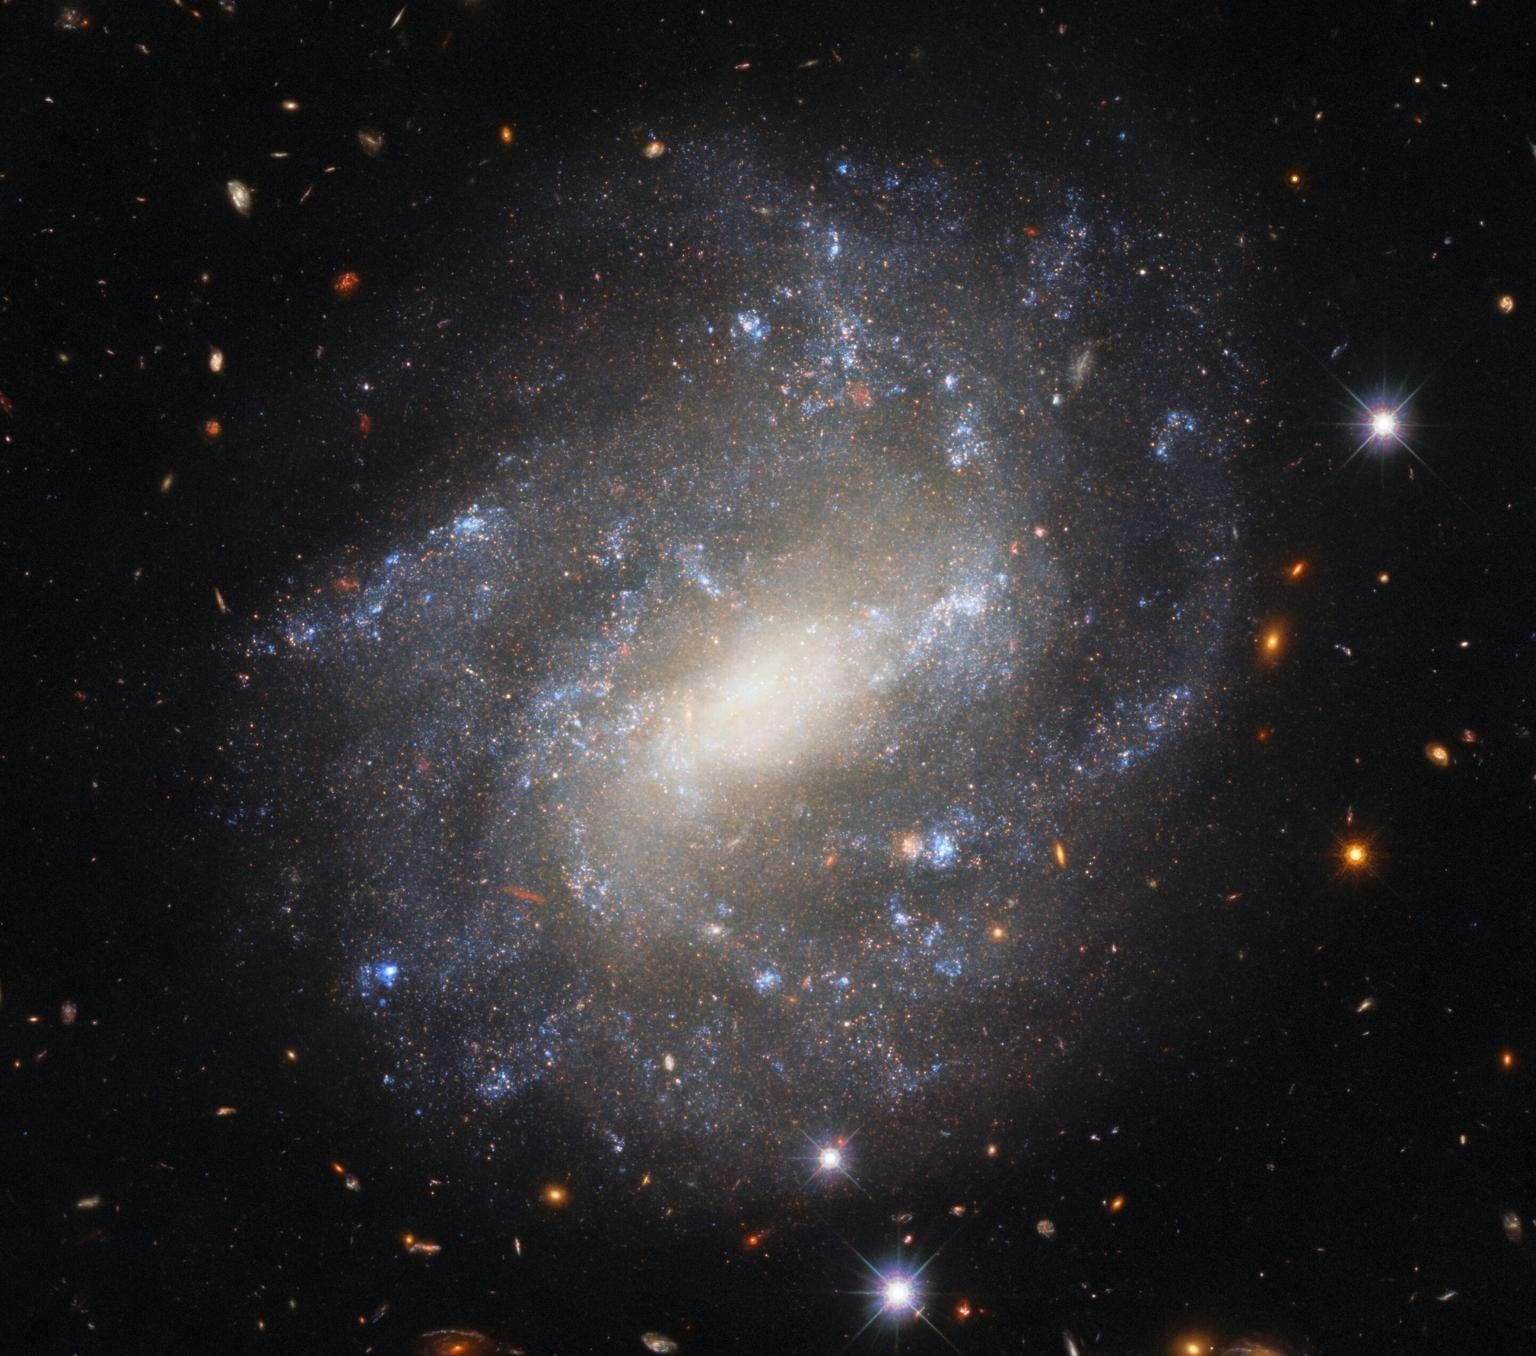 Image of a spiral galaxy. Its star-studded spiral arms stand in splendid isolation against a backdrop of distant galaxies, which are only visible as indistinct swirls or smudges thanks to their vast distances from Earth. The image also features some much brighter foreground stars closer to home. These bright nearby stars are ringed with diffraction spikes – prominent spikes caused by light interacting with the inner workings of Hubble’s secondary mirror supports.